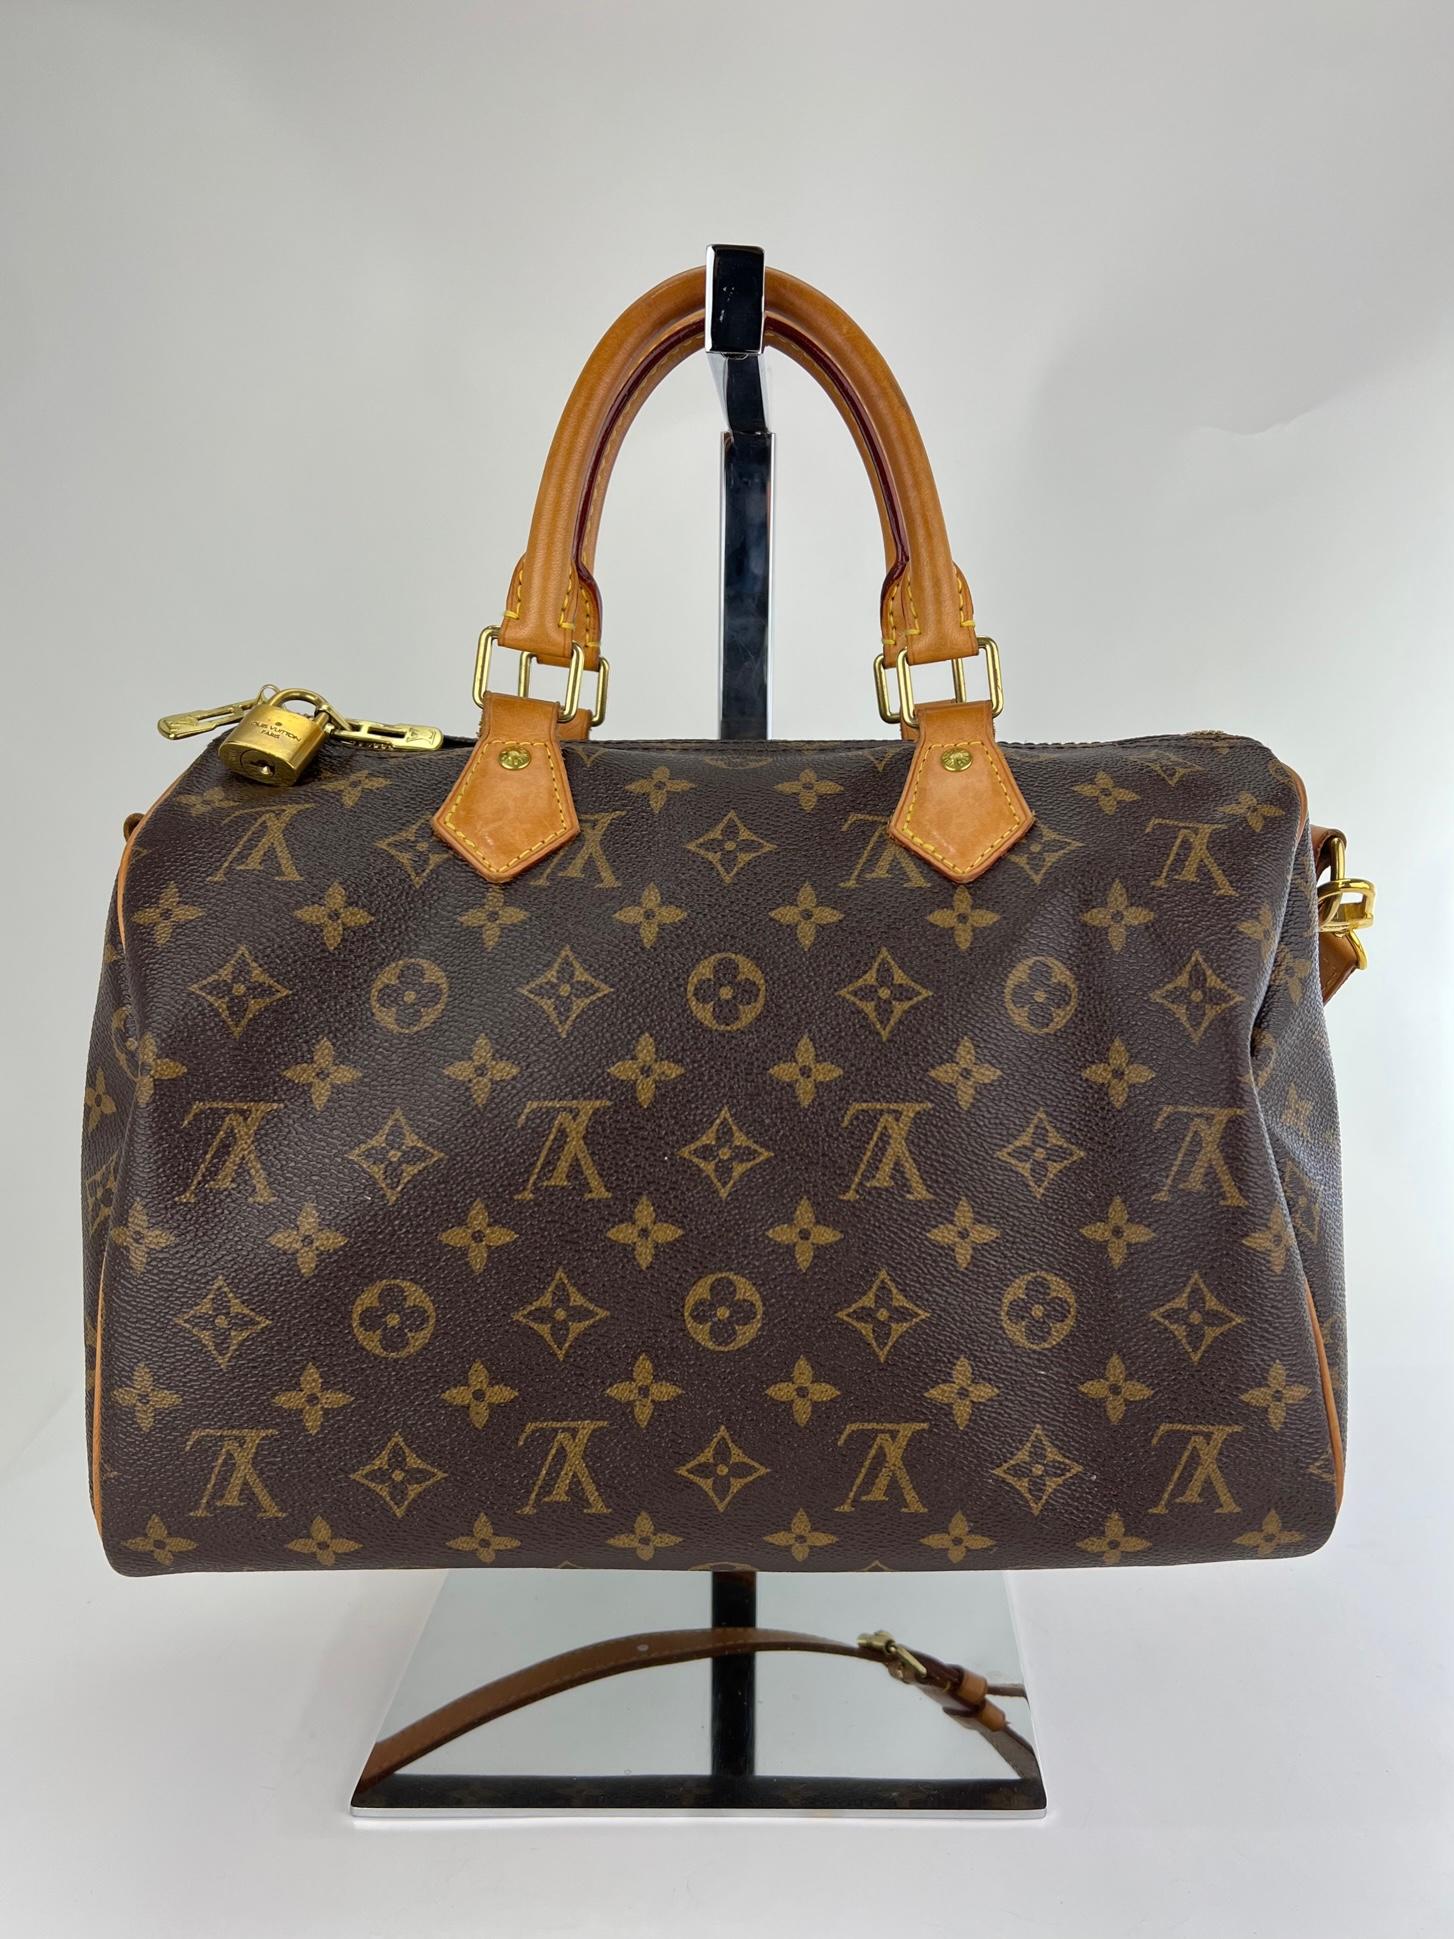 Preowned 100% Authentic
Louis Vuitton Speedy Bandouliere 30 Monogram
W/added insert to help keep its shape and organize
RATING: B   very good, well maintained, shows
minor signs of wear
MATERIAL: monogram canvas, leather trim
HANDLE: double leather,